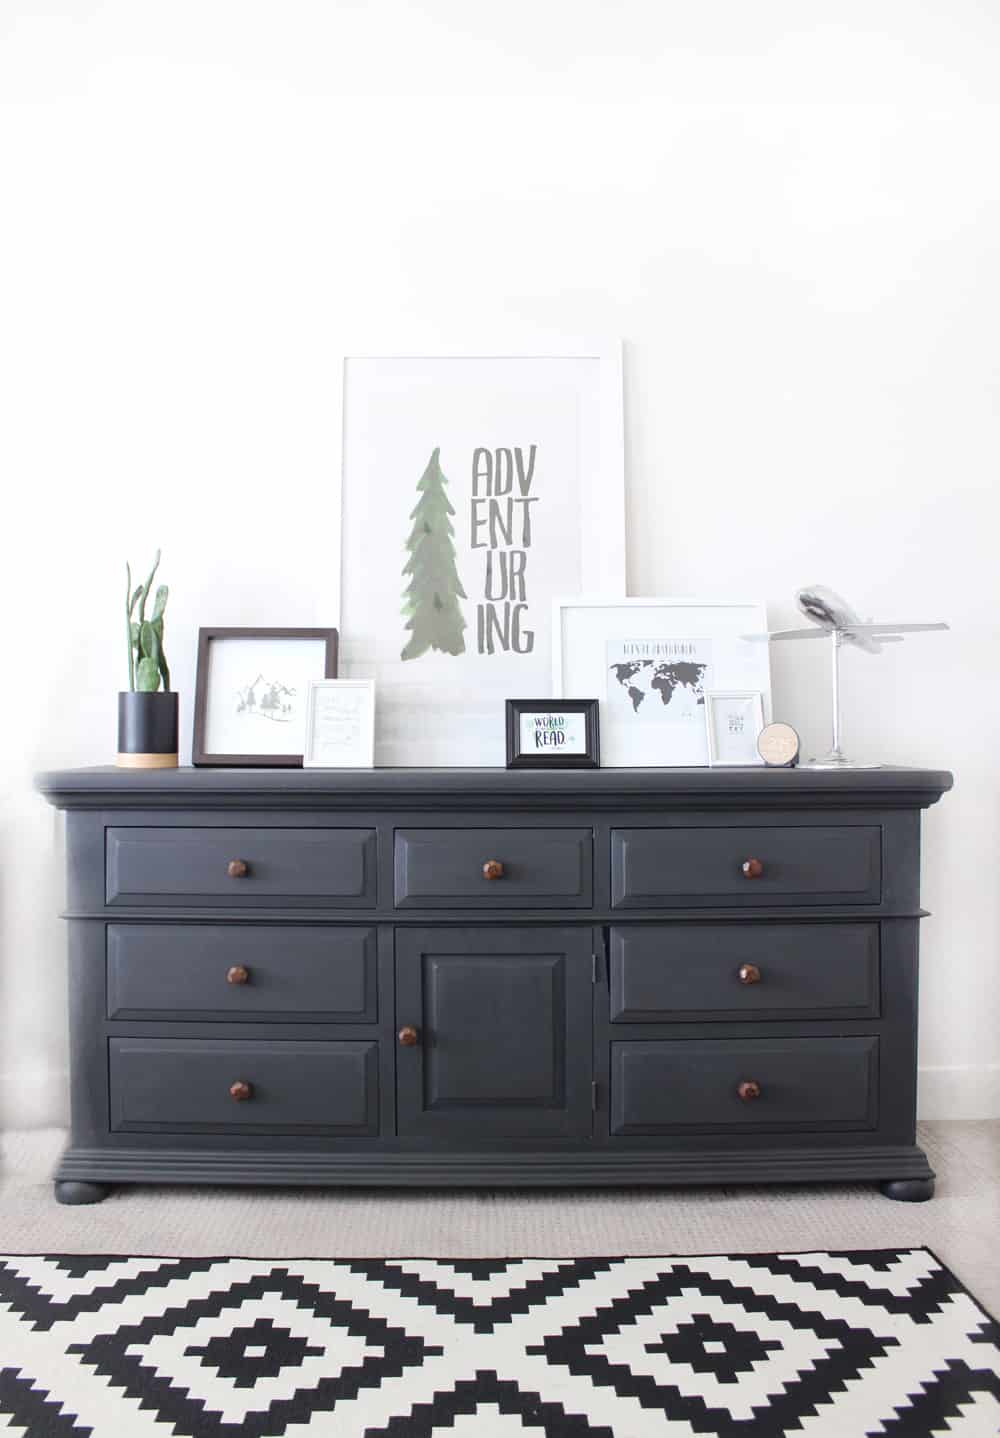 How To Paint Furniture With Chalk, How To Paint A Dresser With Chalk